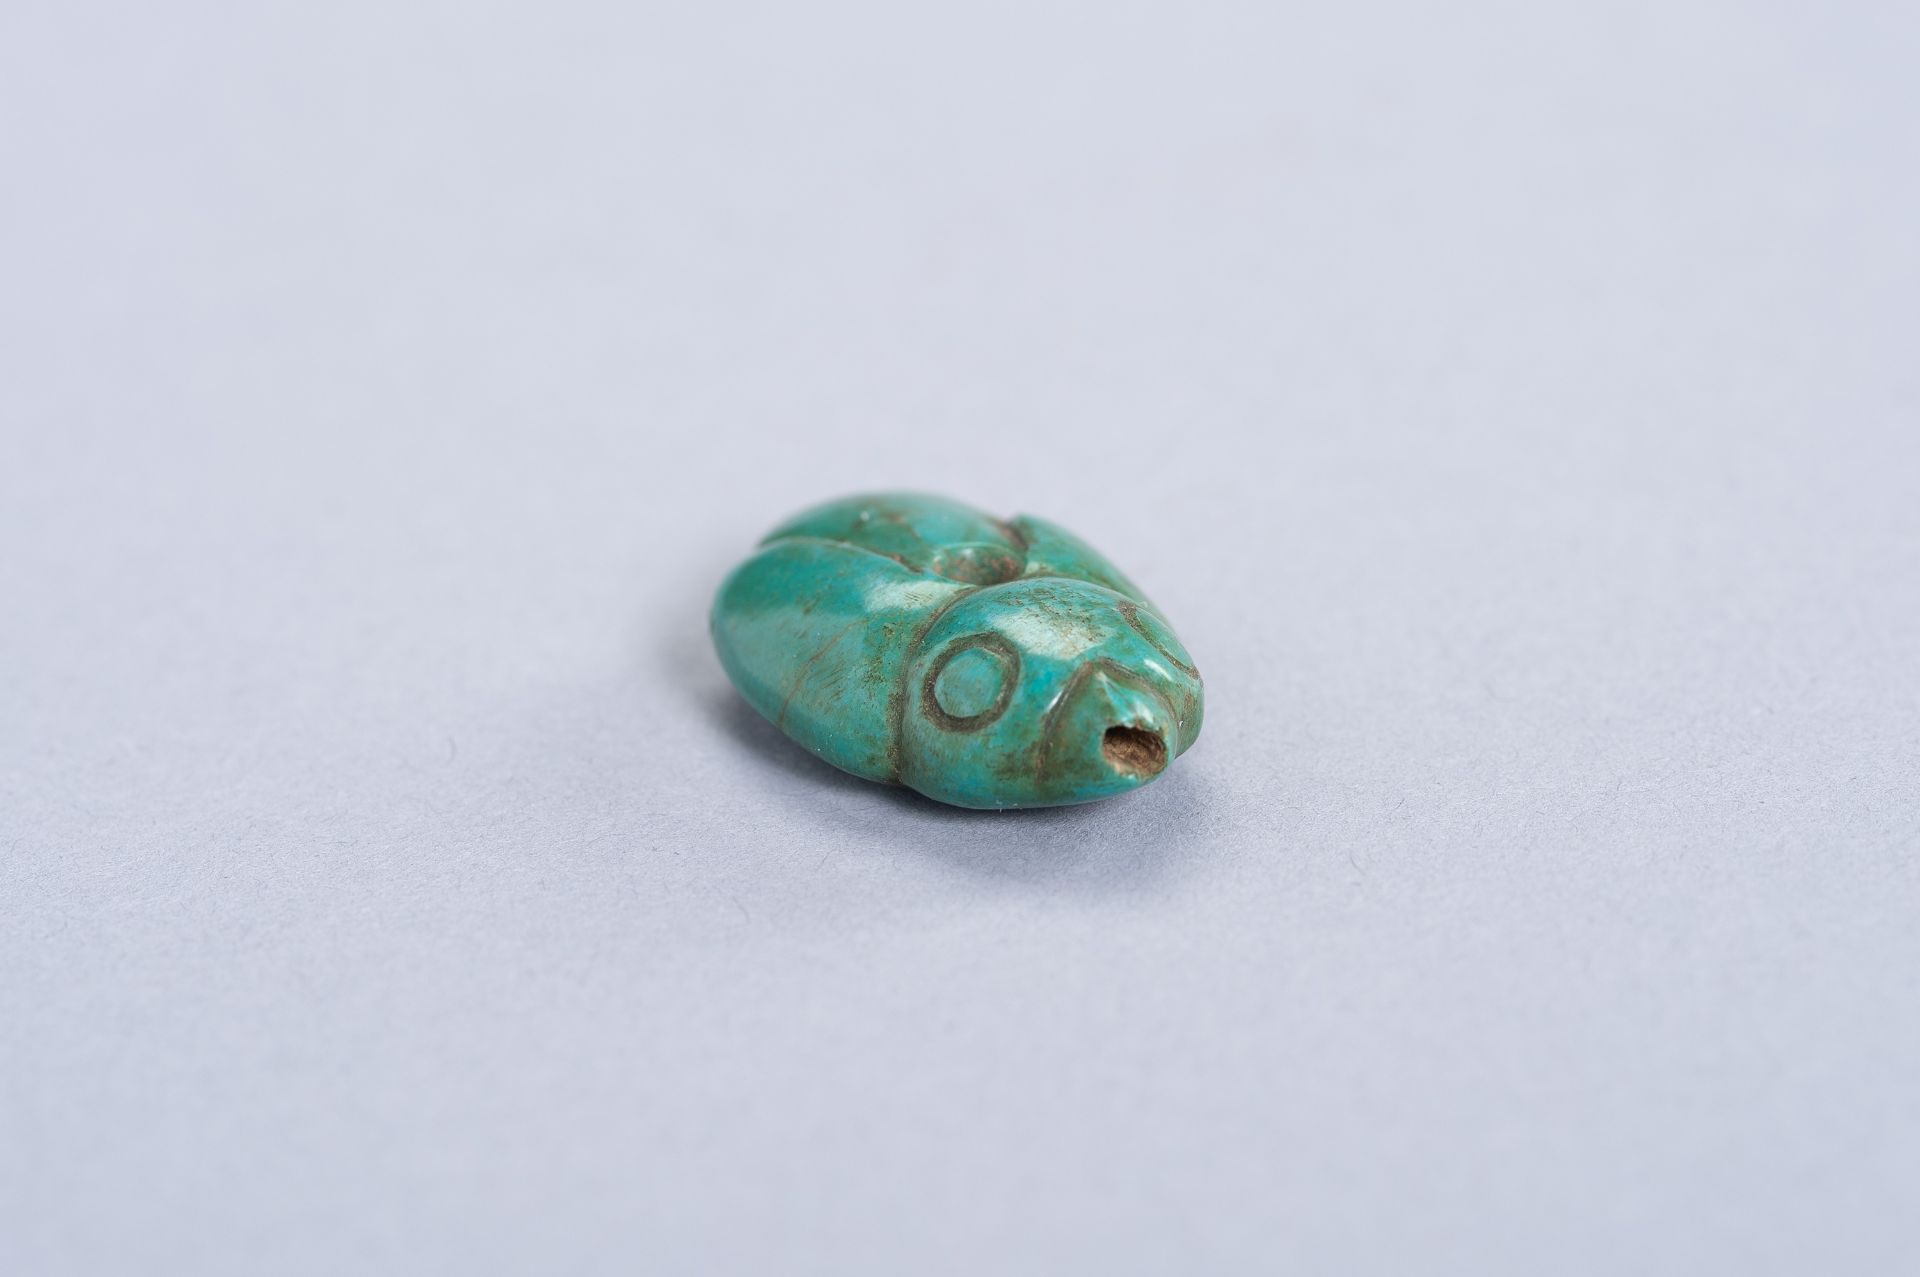 A TURQUOISE PENDANT OF A BIRD - Image 5 of 7